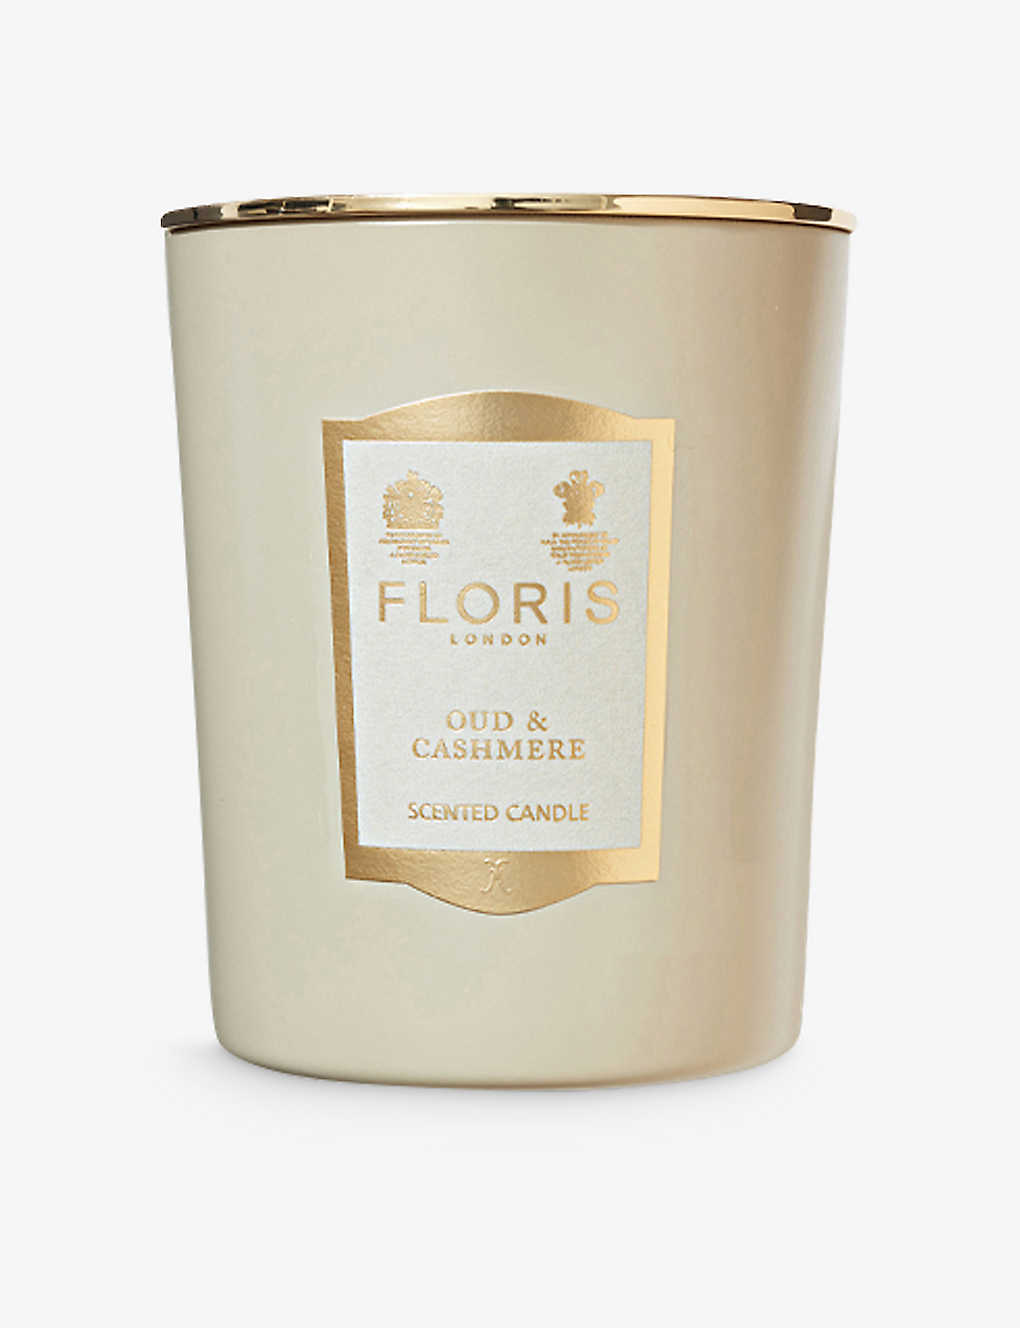 Floris Oud And Cashmere Scented Candle 175g